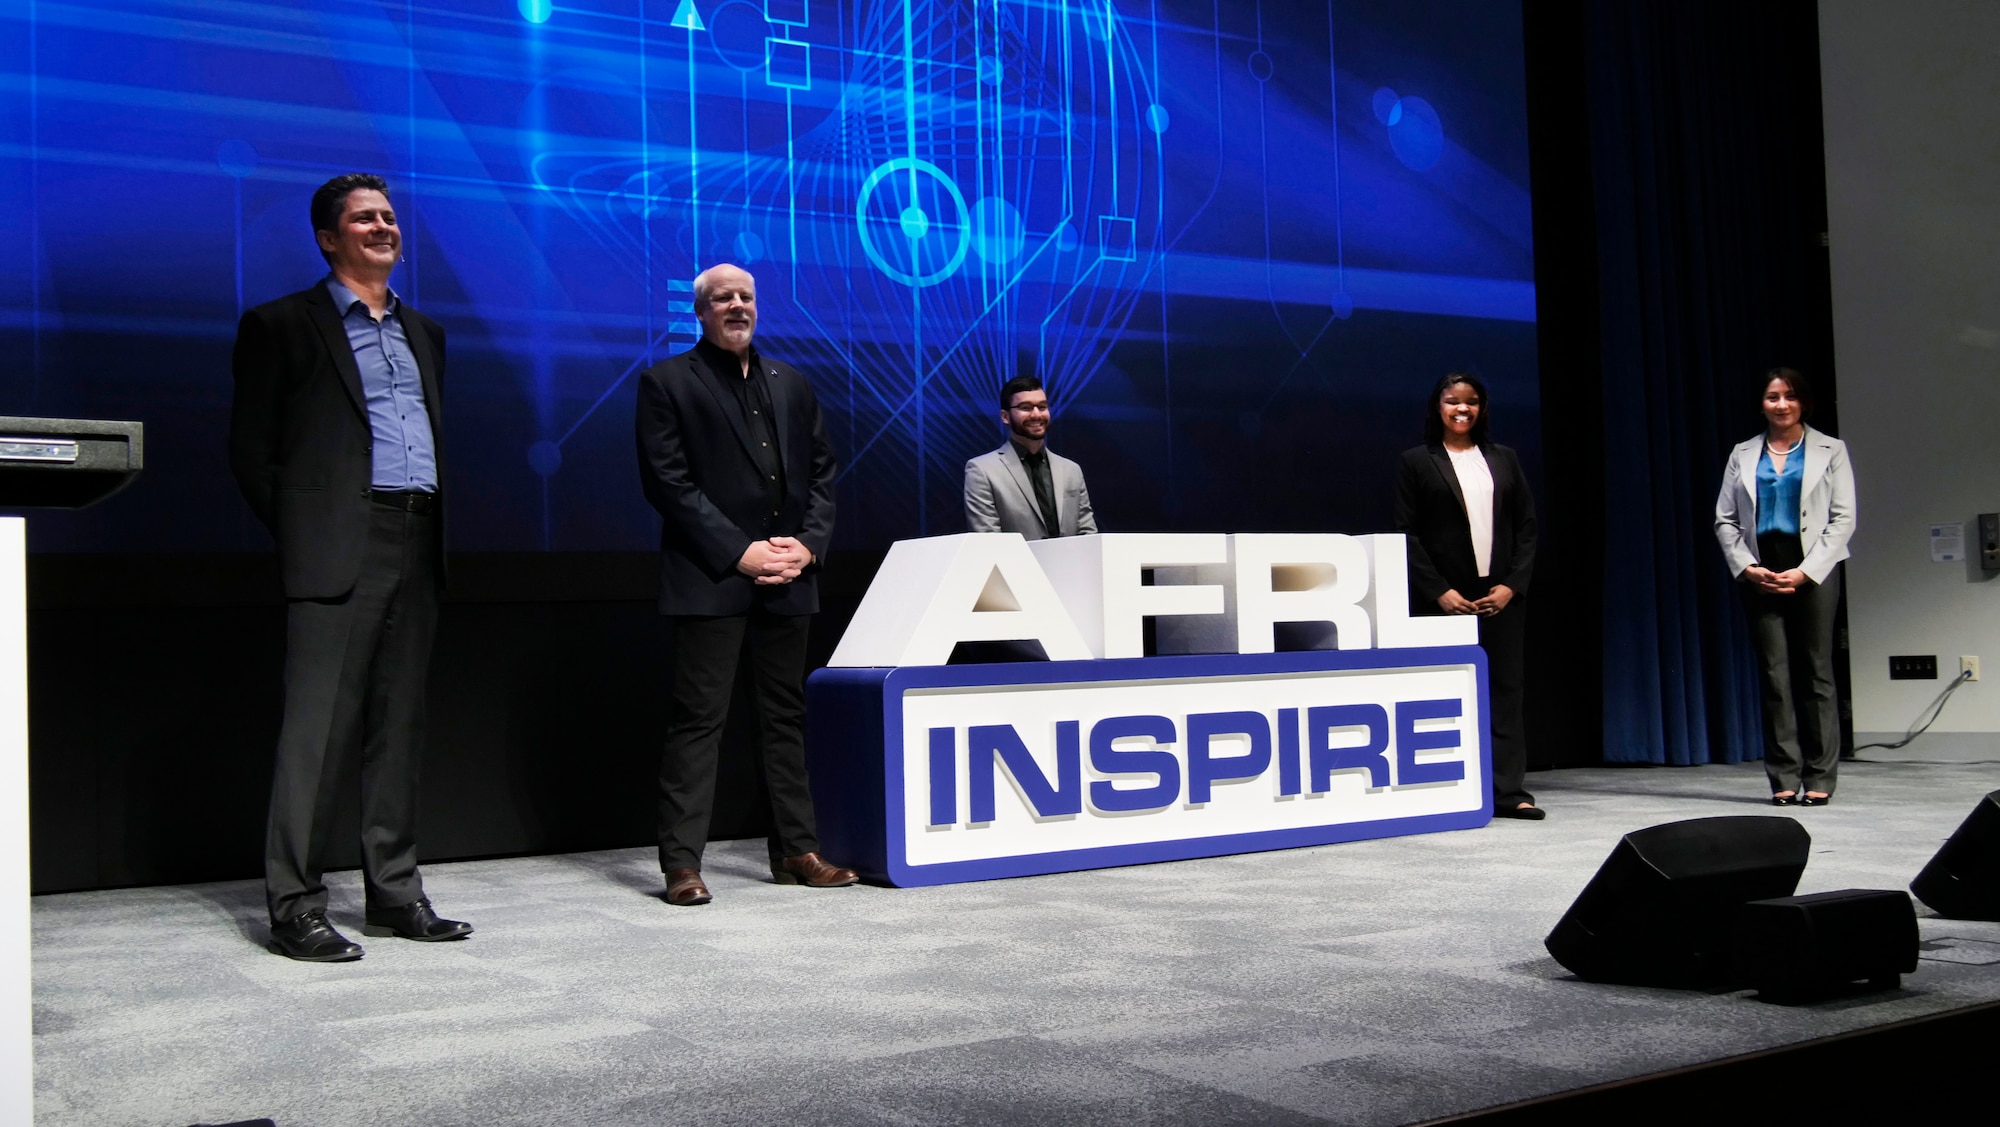 Dr. James Christensen, Dr. Joel Mozer, Kenneth McNulty, Dr. Nia Peters and Sara Telano on stage during AFRL Inspire 2021. (U.S. Air Force photo/Keith Lewis)